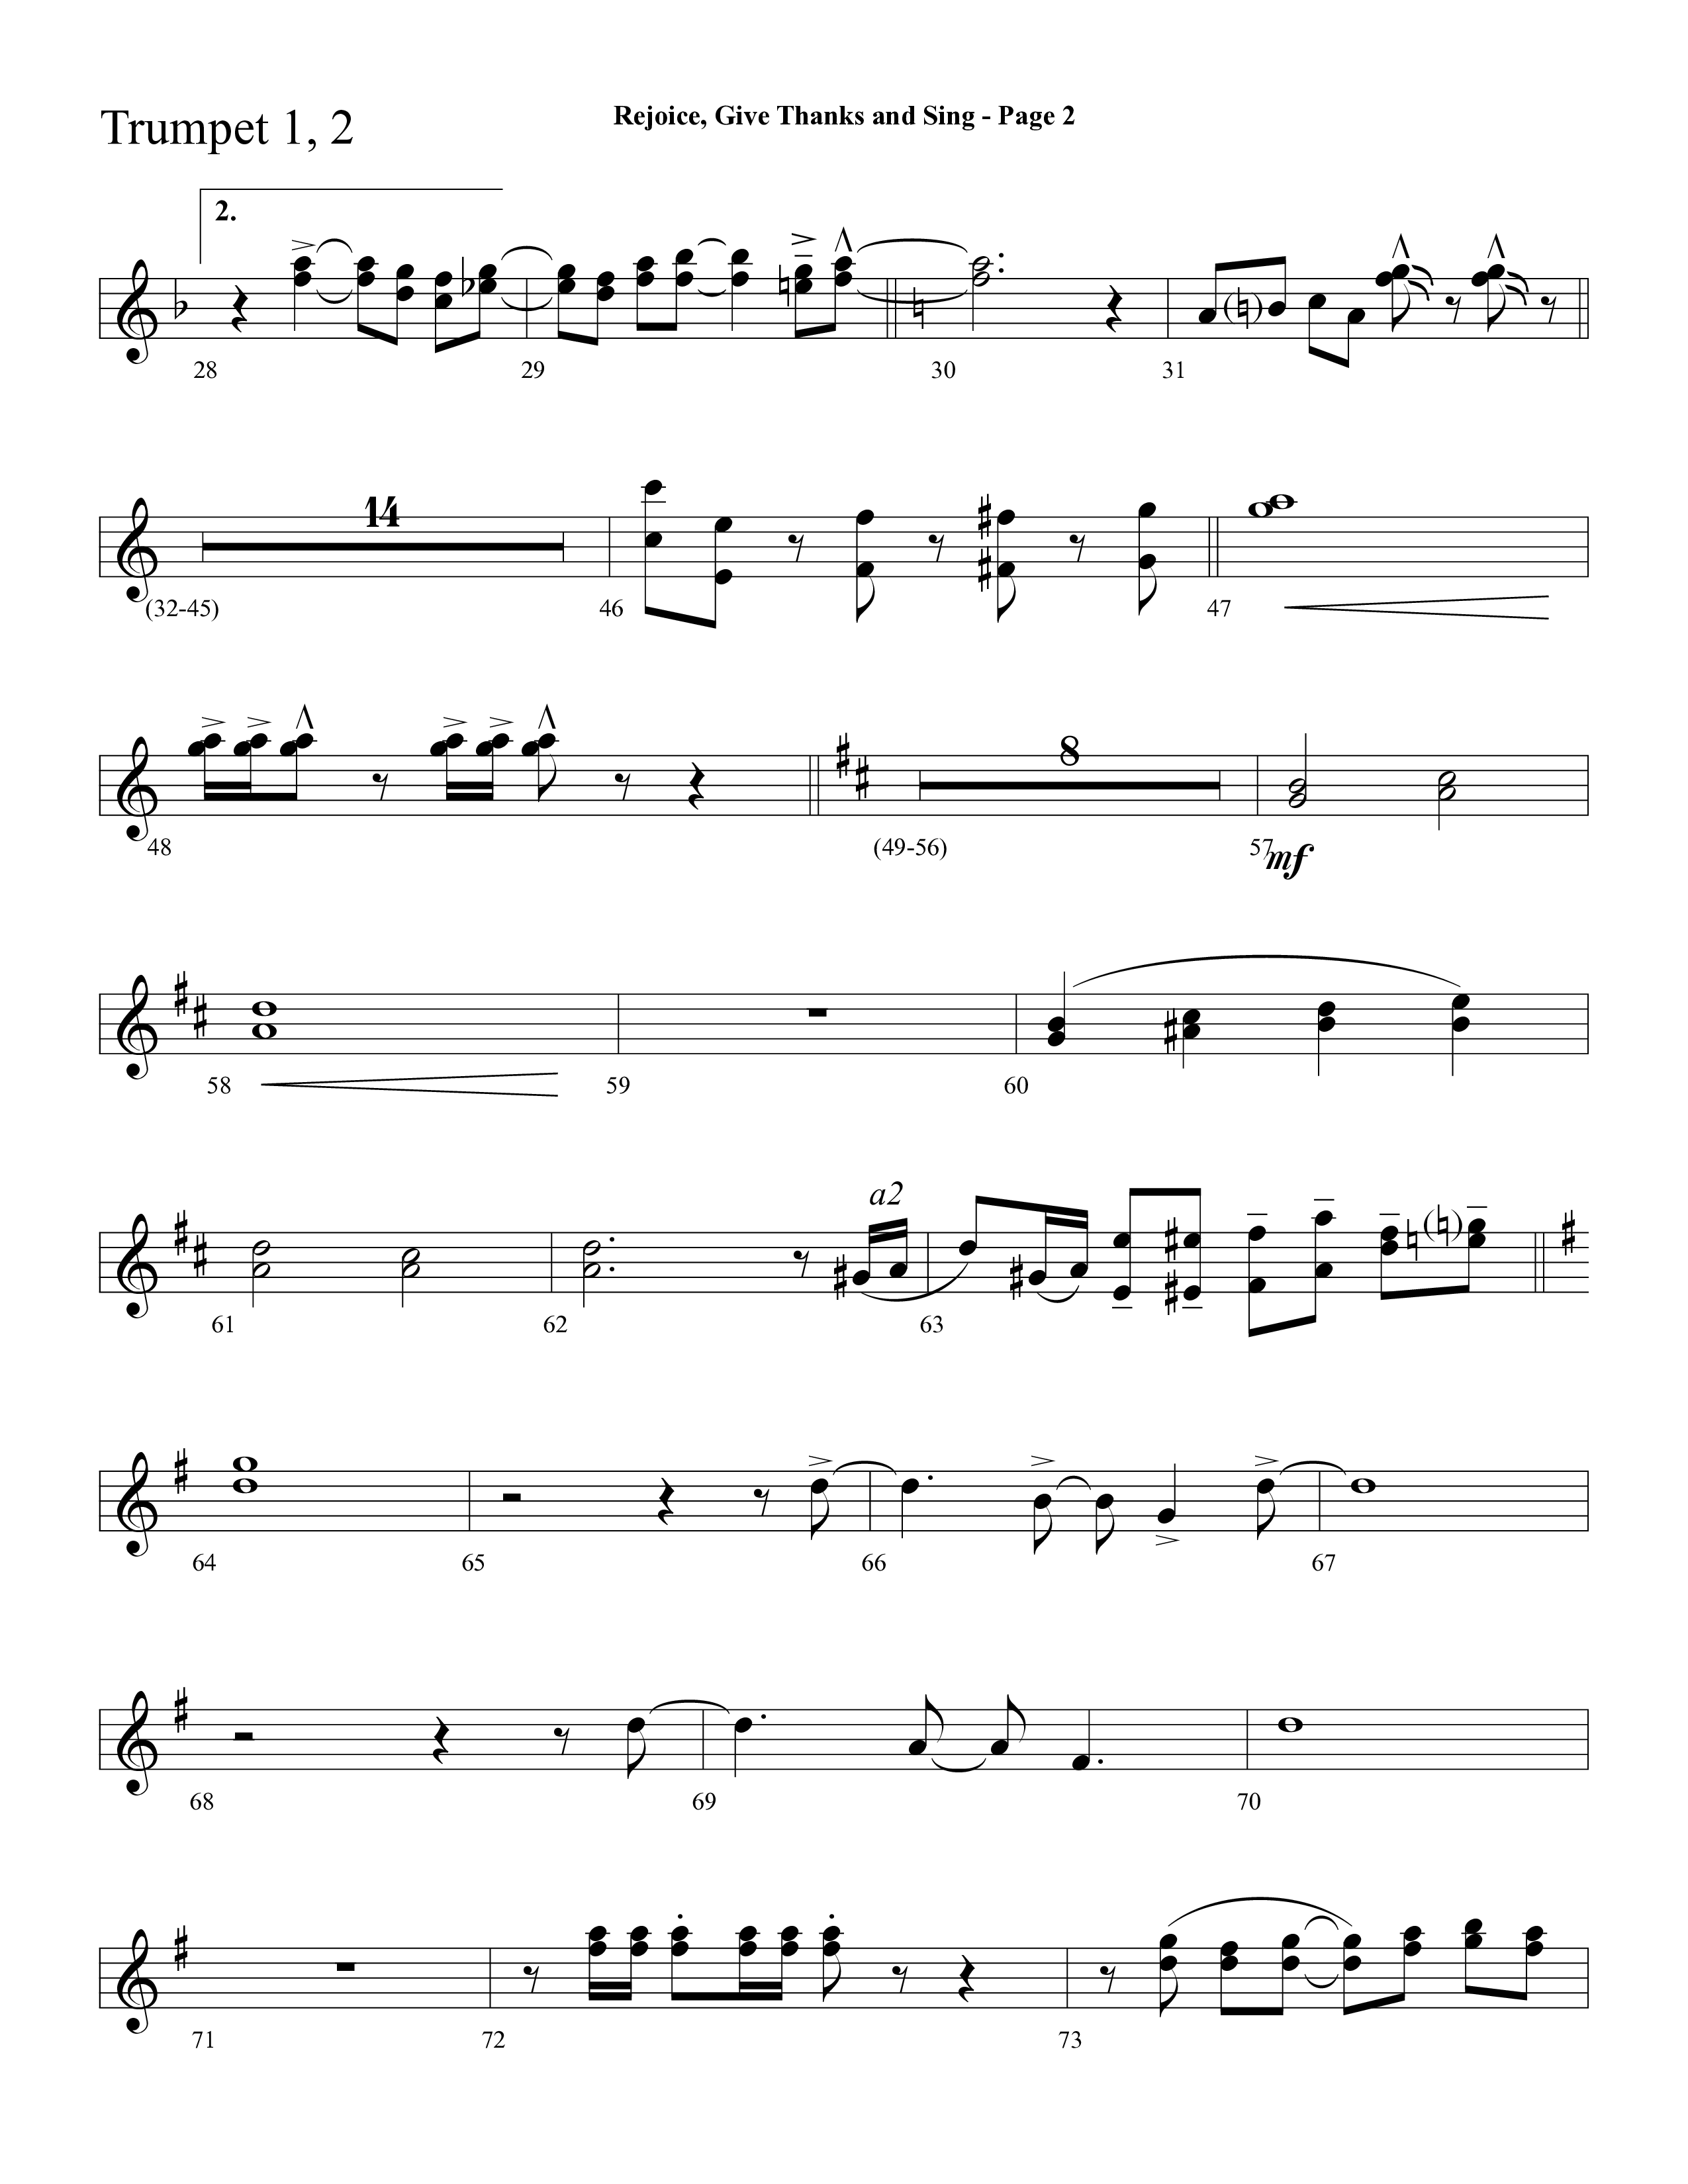 Rejoice, Give Thanks And Sing (with Rejoice, The Lord Is King, Come, Thou Almighty King) (Choral Anthem SATB) Trumpet 1,2 (Lifeway Choral / Arr. Dave Williamson)